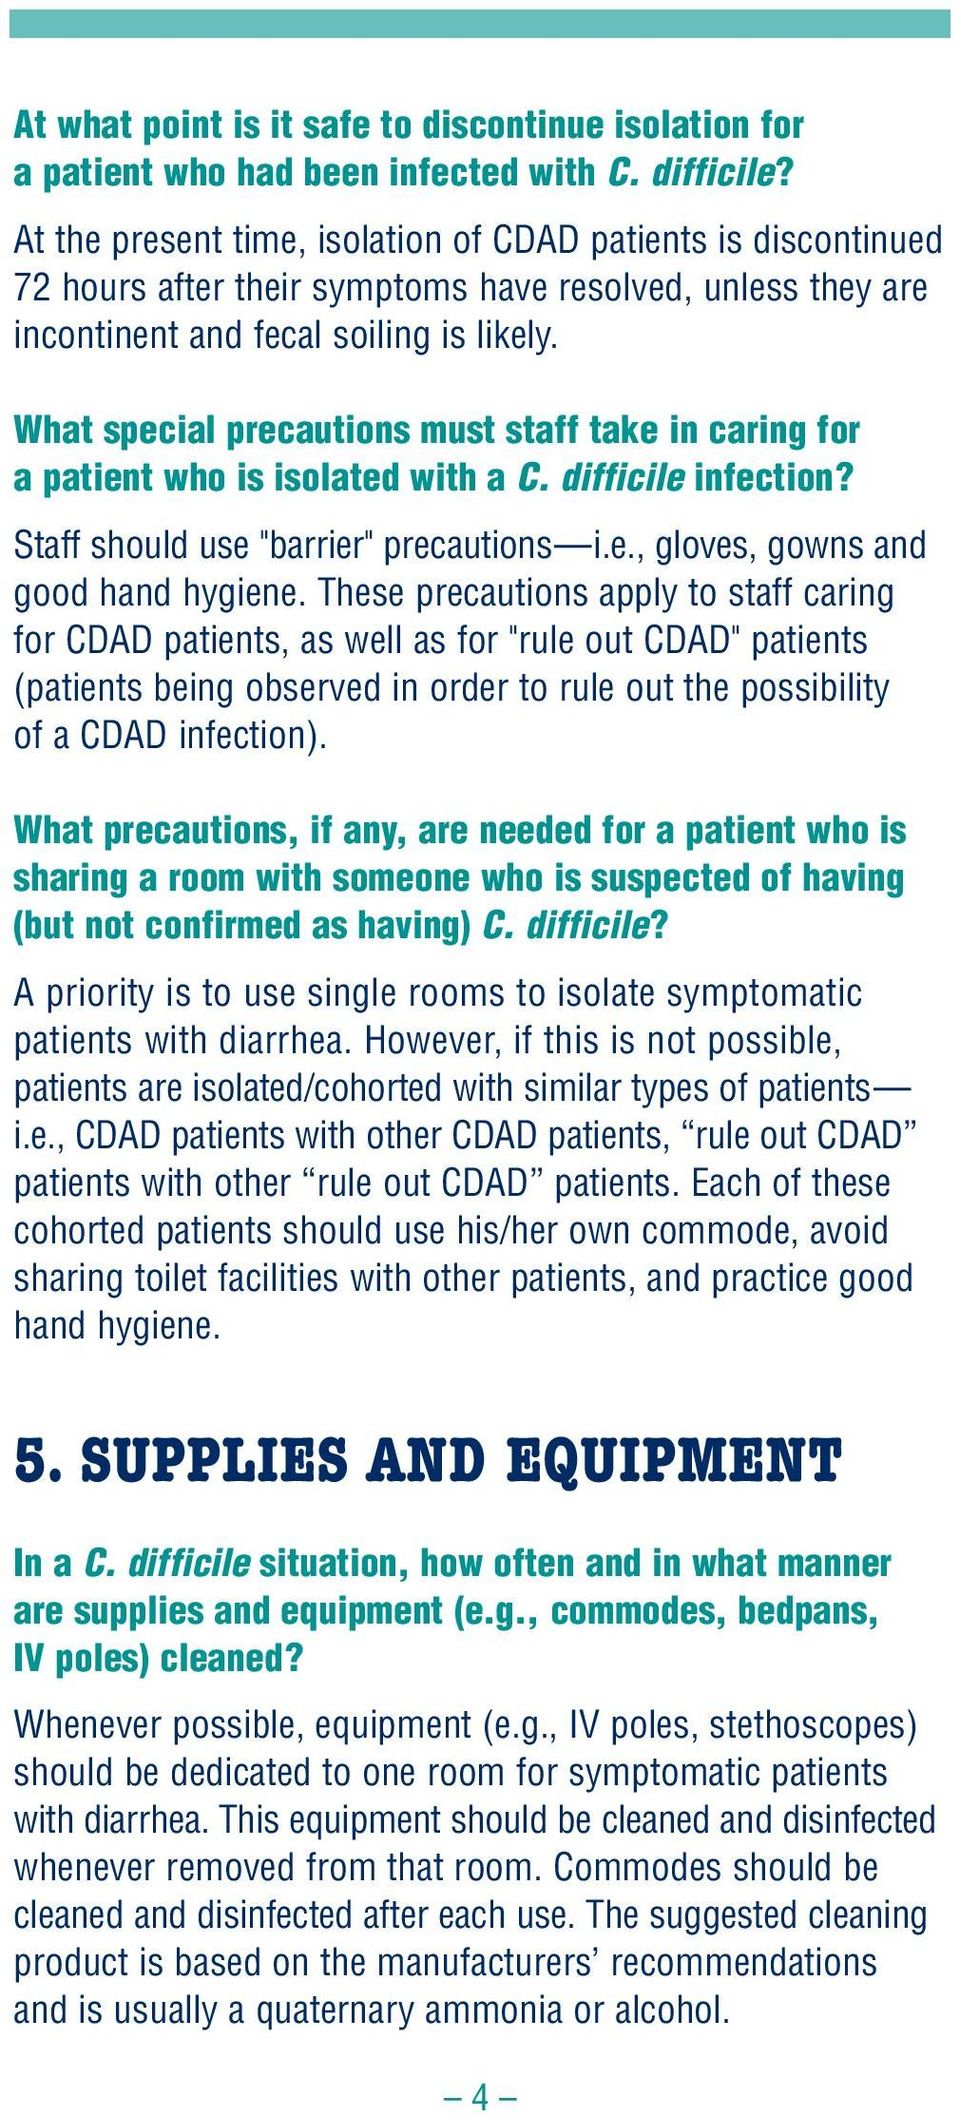 What special precautions must staff take in caring for a patient who is isolated with a C. difficile infection? Staff should use "barrier" precautions i.e., gloves, gowns and good hand hygiene.